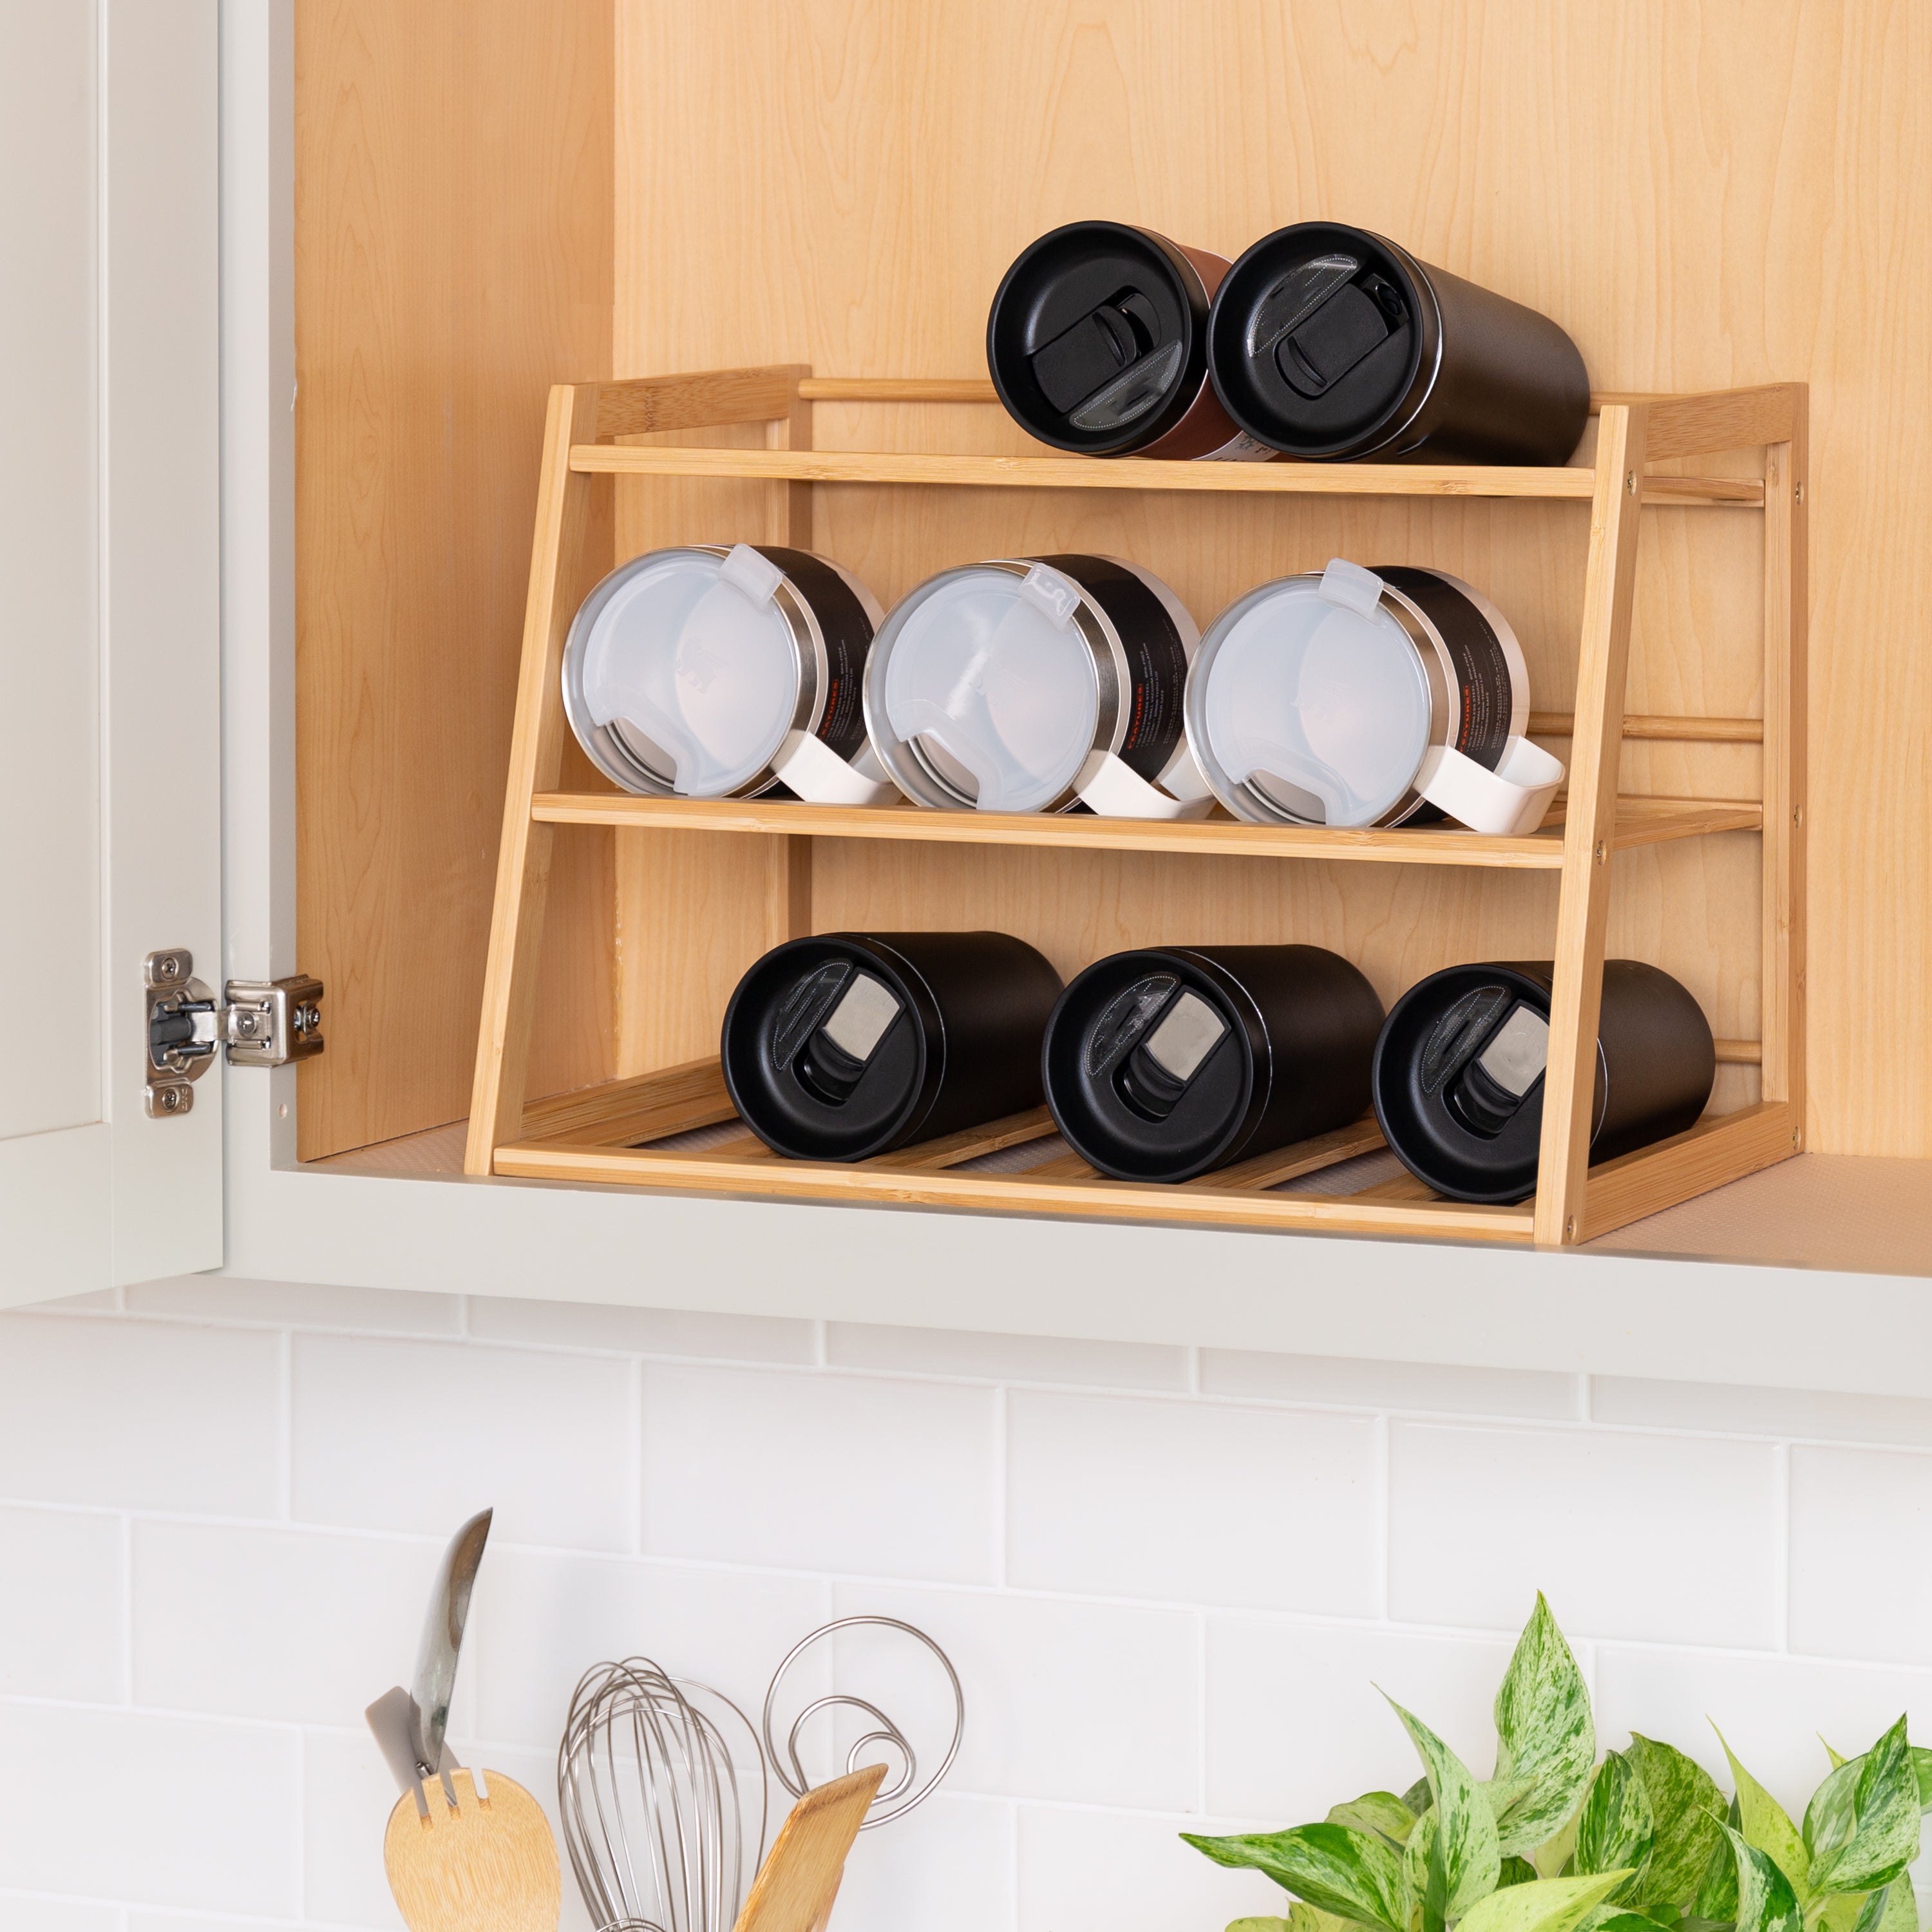 Buy Bamboo Spice Rack Drawer Organizer - Call to Action: Get your kitchen  organized with our Bamboo Spice Rack Drawer Organizer. Order now!